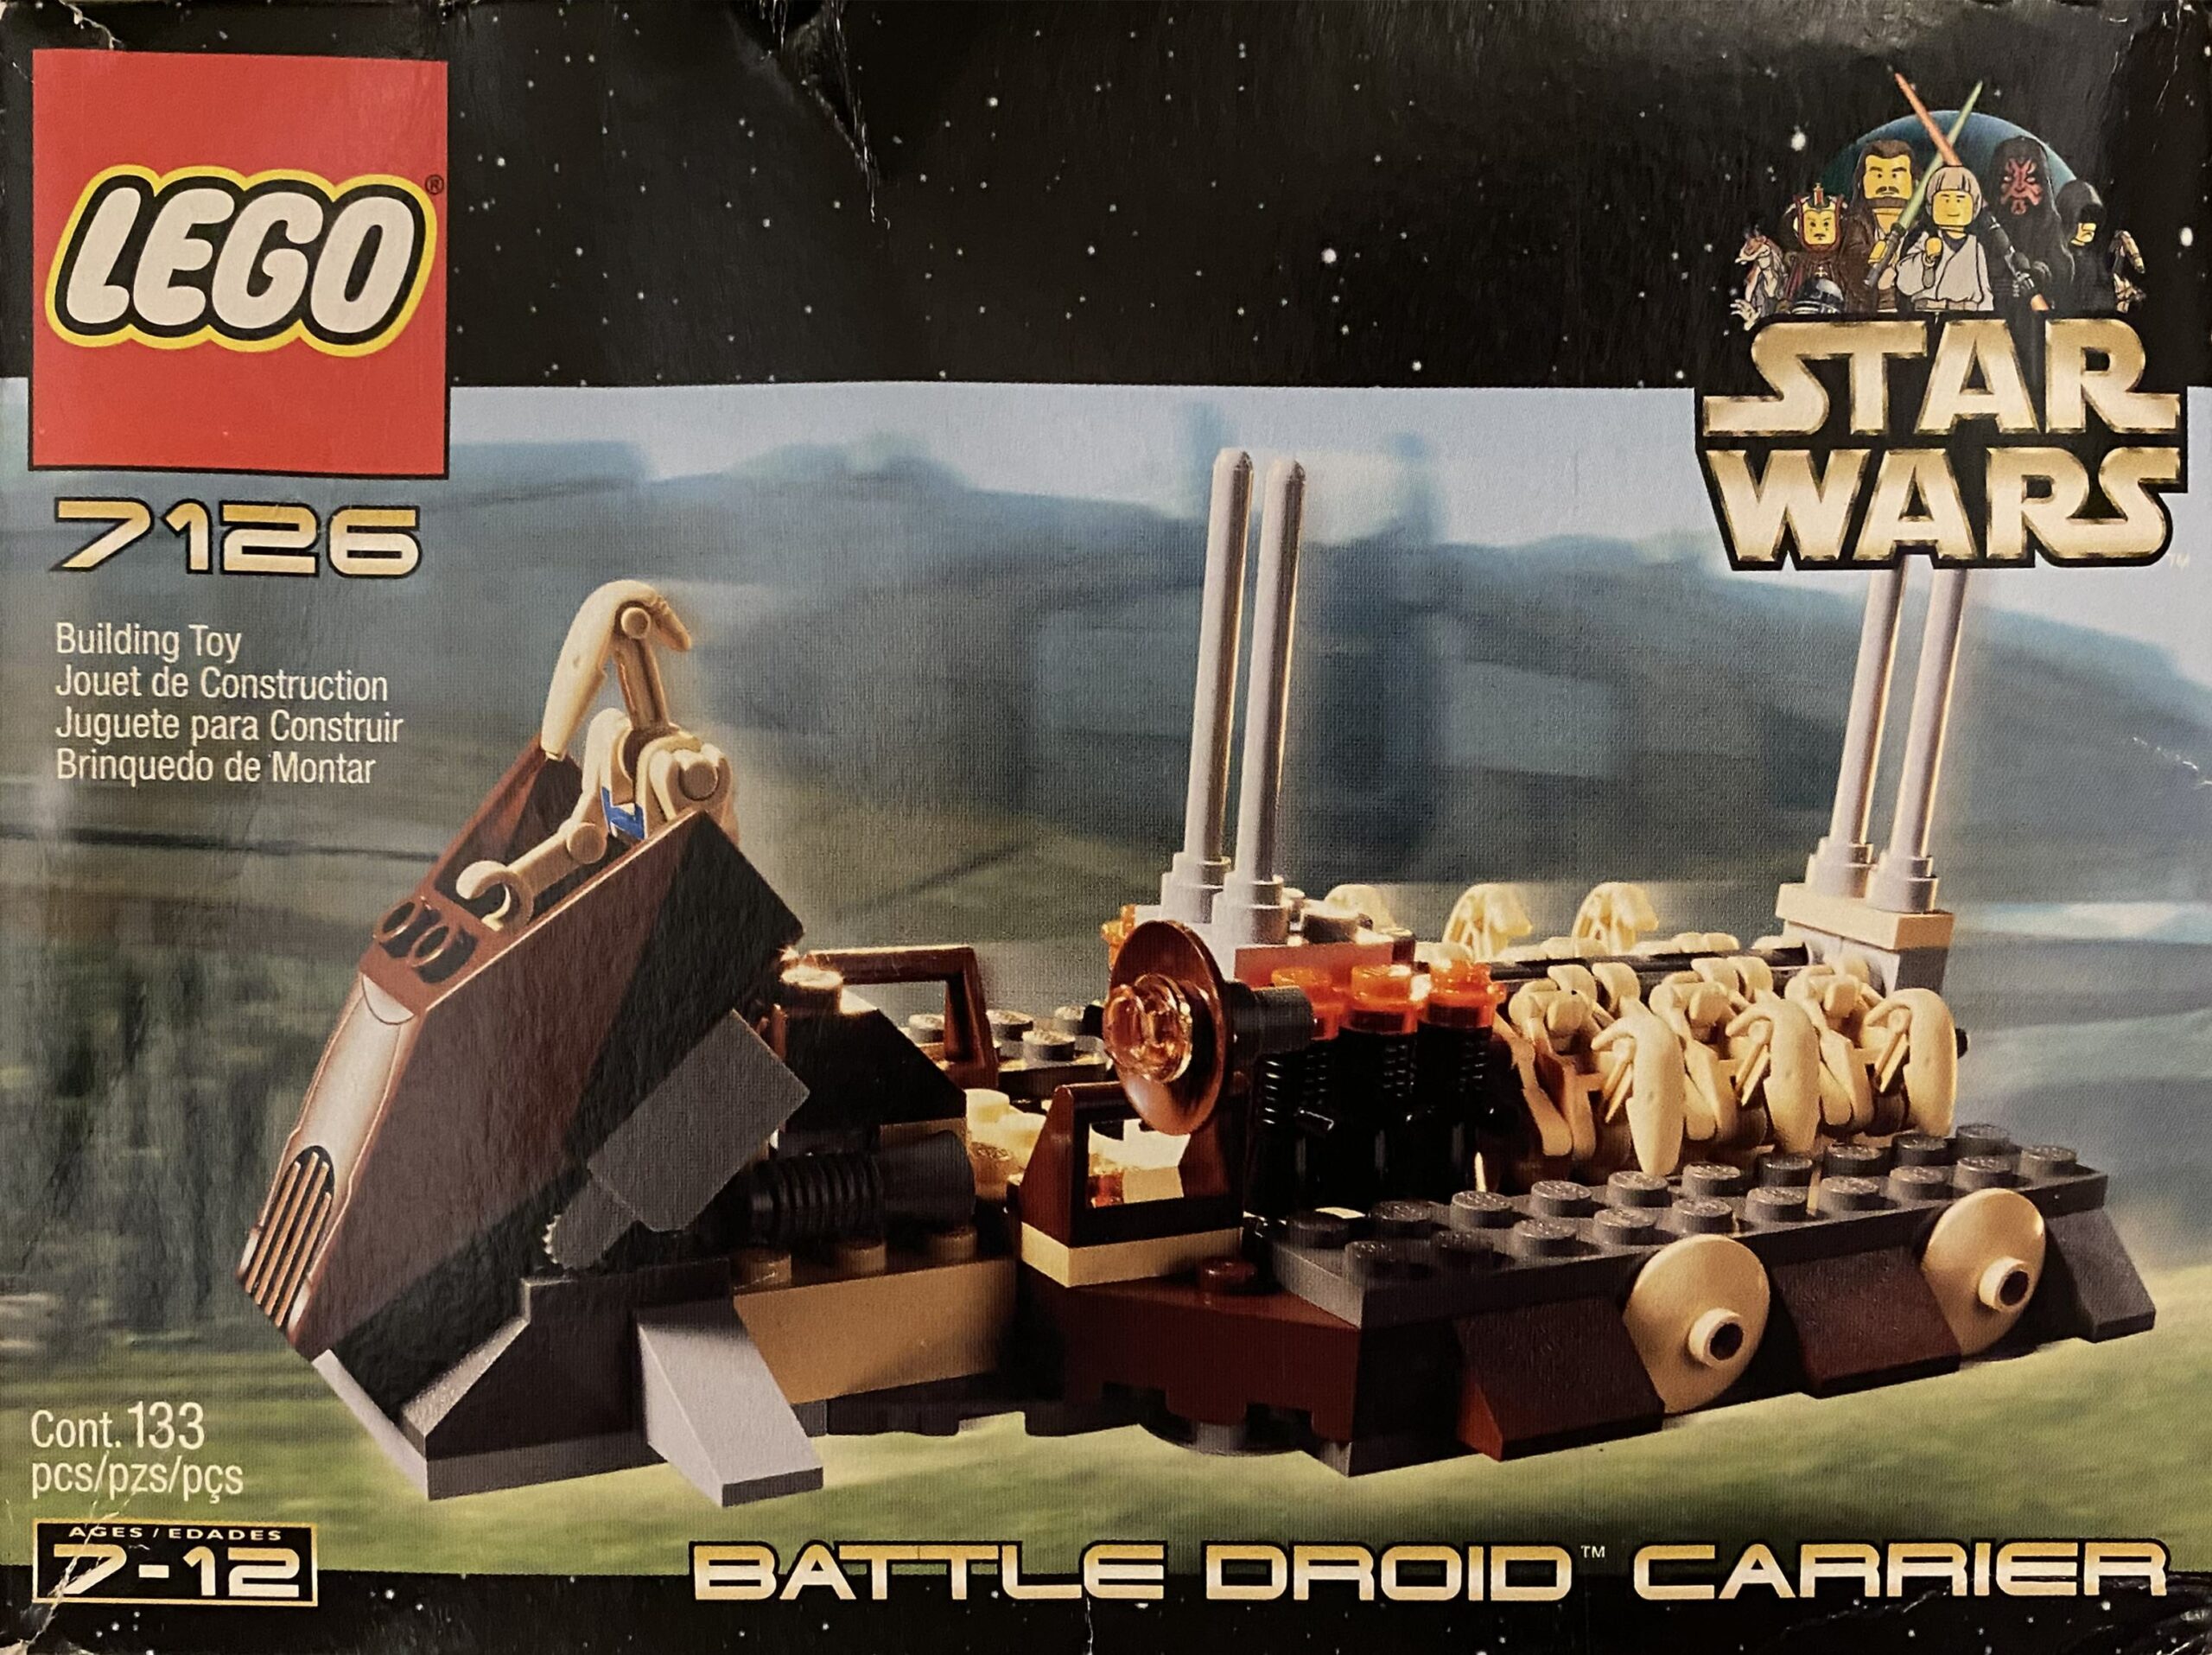 7126: Battle Droid Carrier - Back of the Box Builds